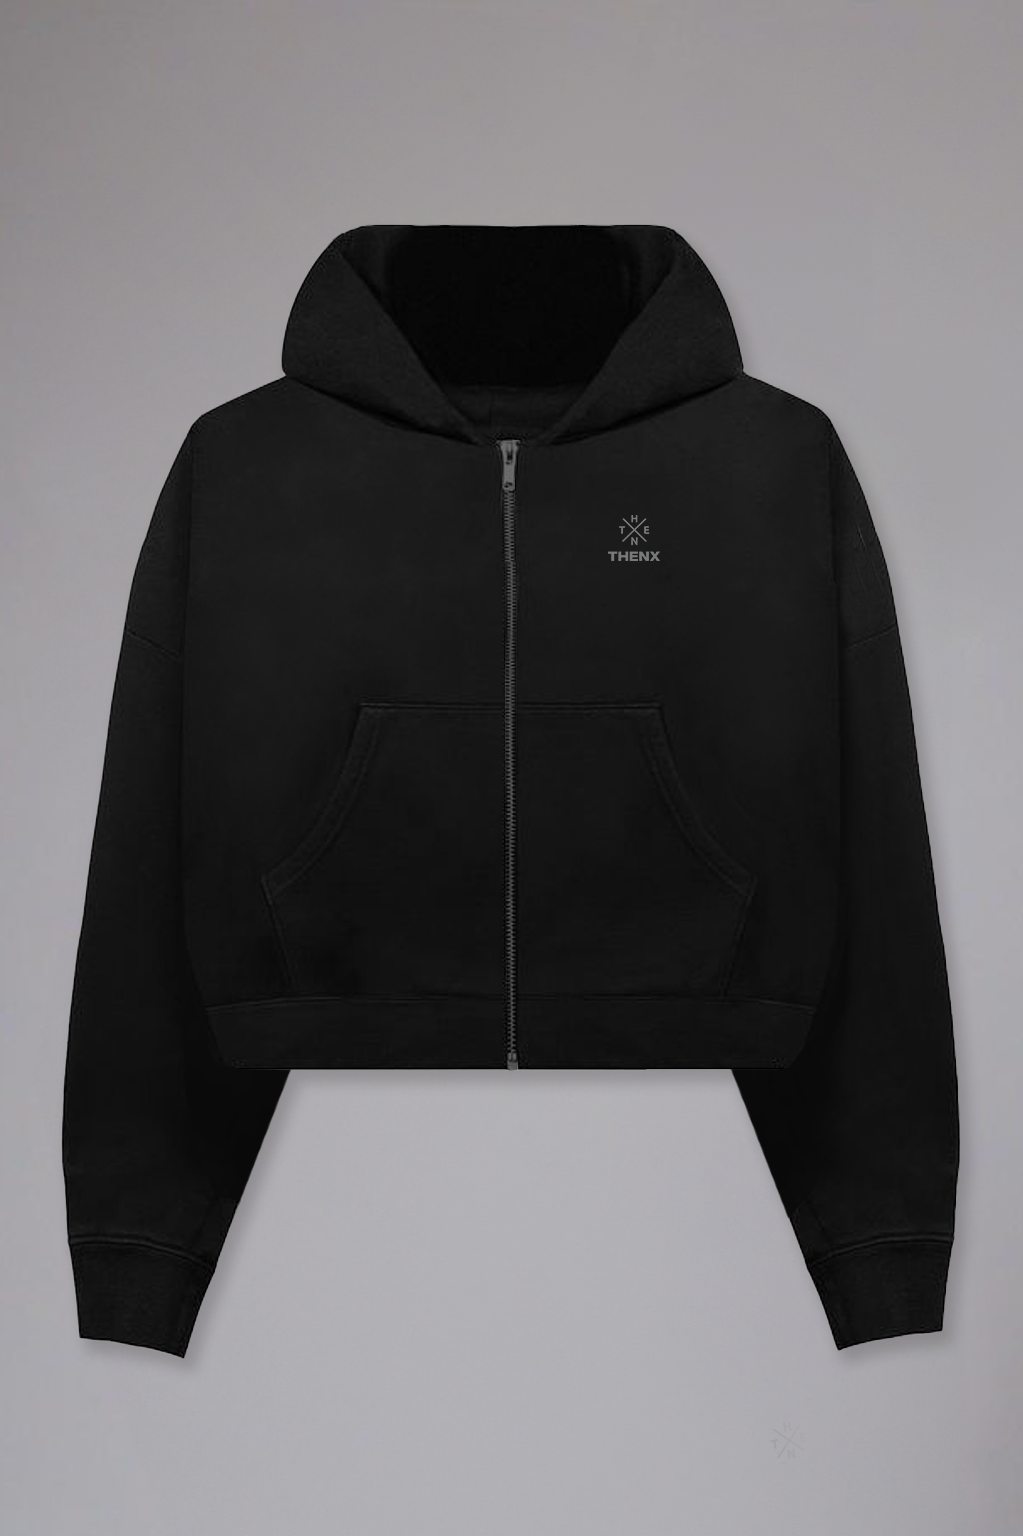 Thenx Cropped Hoodie - Black - THENX